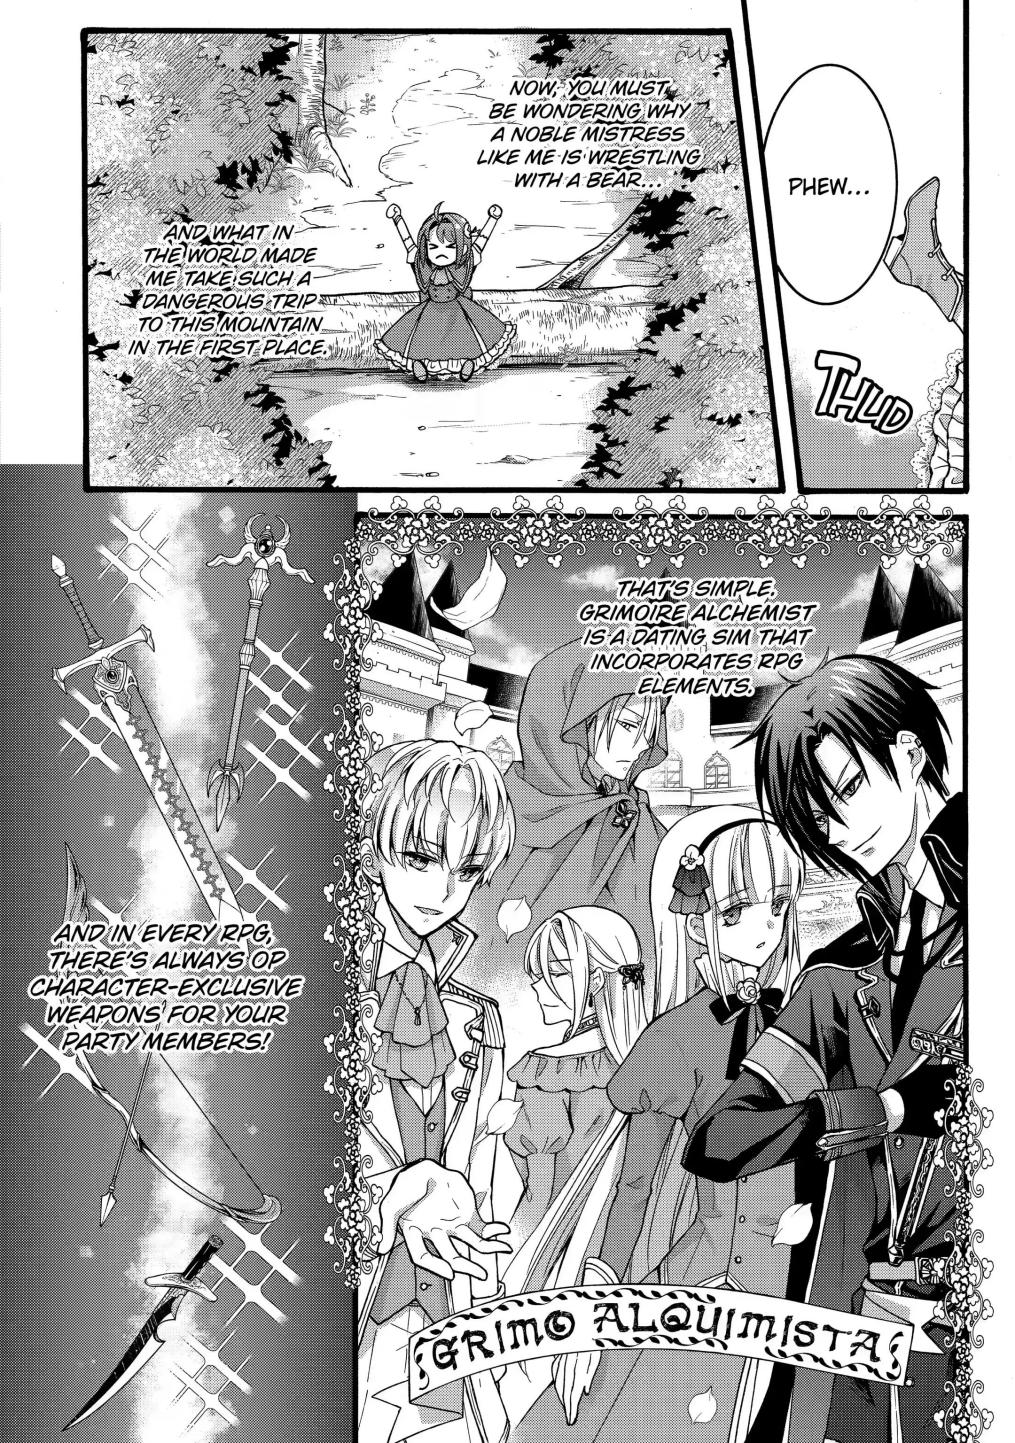 How to Survive a Thousand Deaths: Accidentally Wooing Everyone as an Ex-gamer Made Villainess! - chapter 24.1 - #4